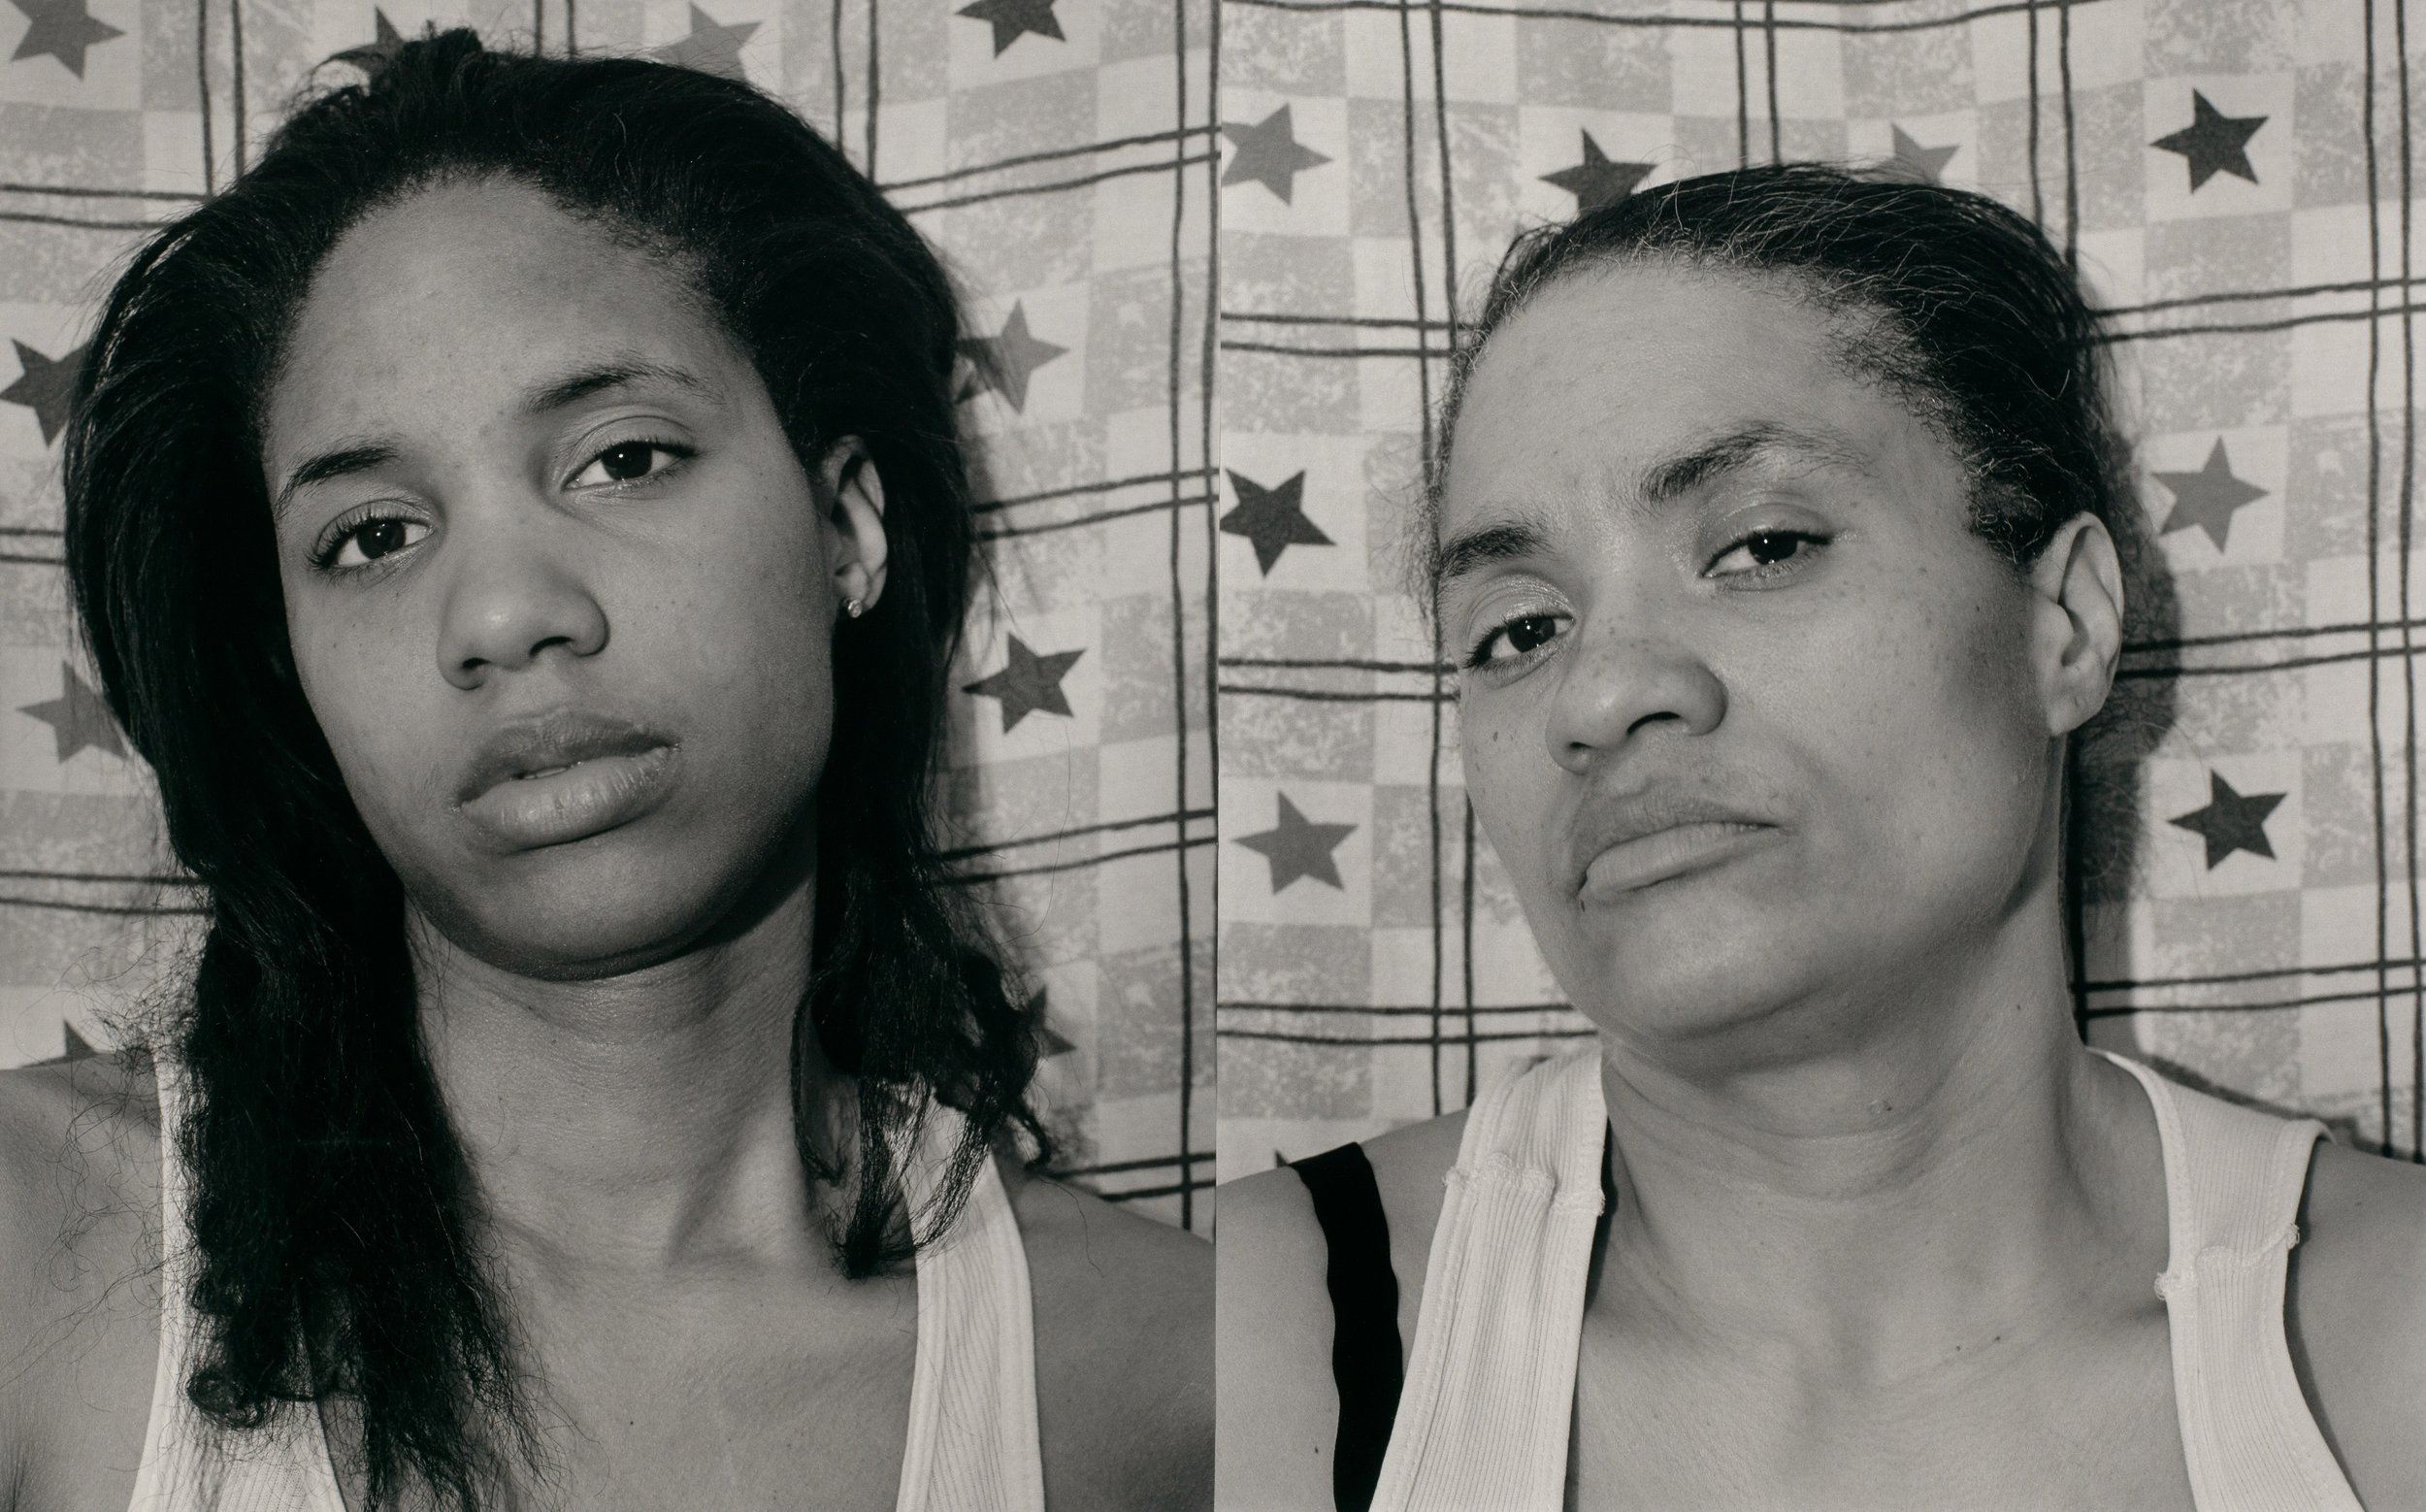   LaToya Ruby Frazier  United States, born 1982  Mom and Me , 2008 gelatin silver print, 22 x 37 1/4 inches Museum purchase with support from Friends of the Collection, 2023.2.1 © LaToya Ruby Frazier 